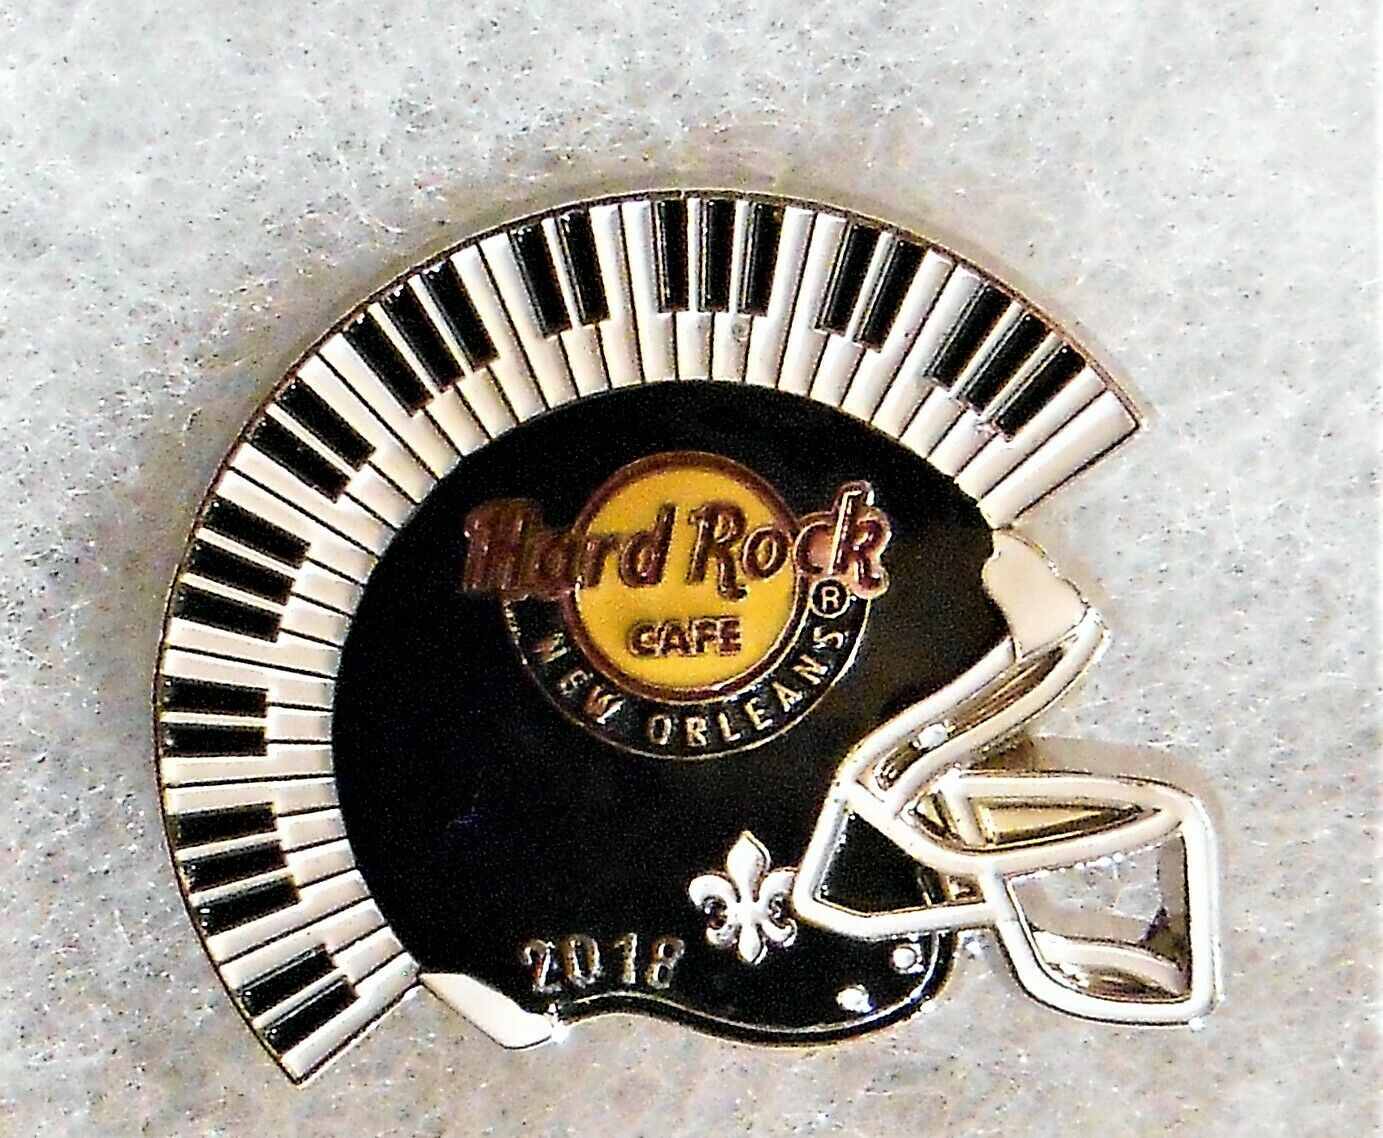 Hard Rock Cafe New Orleans 3d Black Football Helmet With Keyboard Pin # 100191